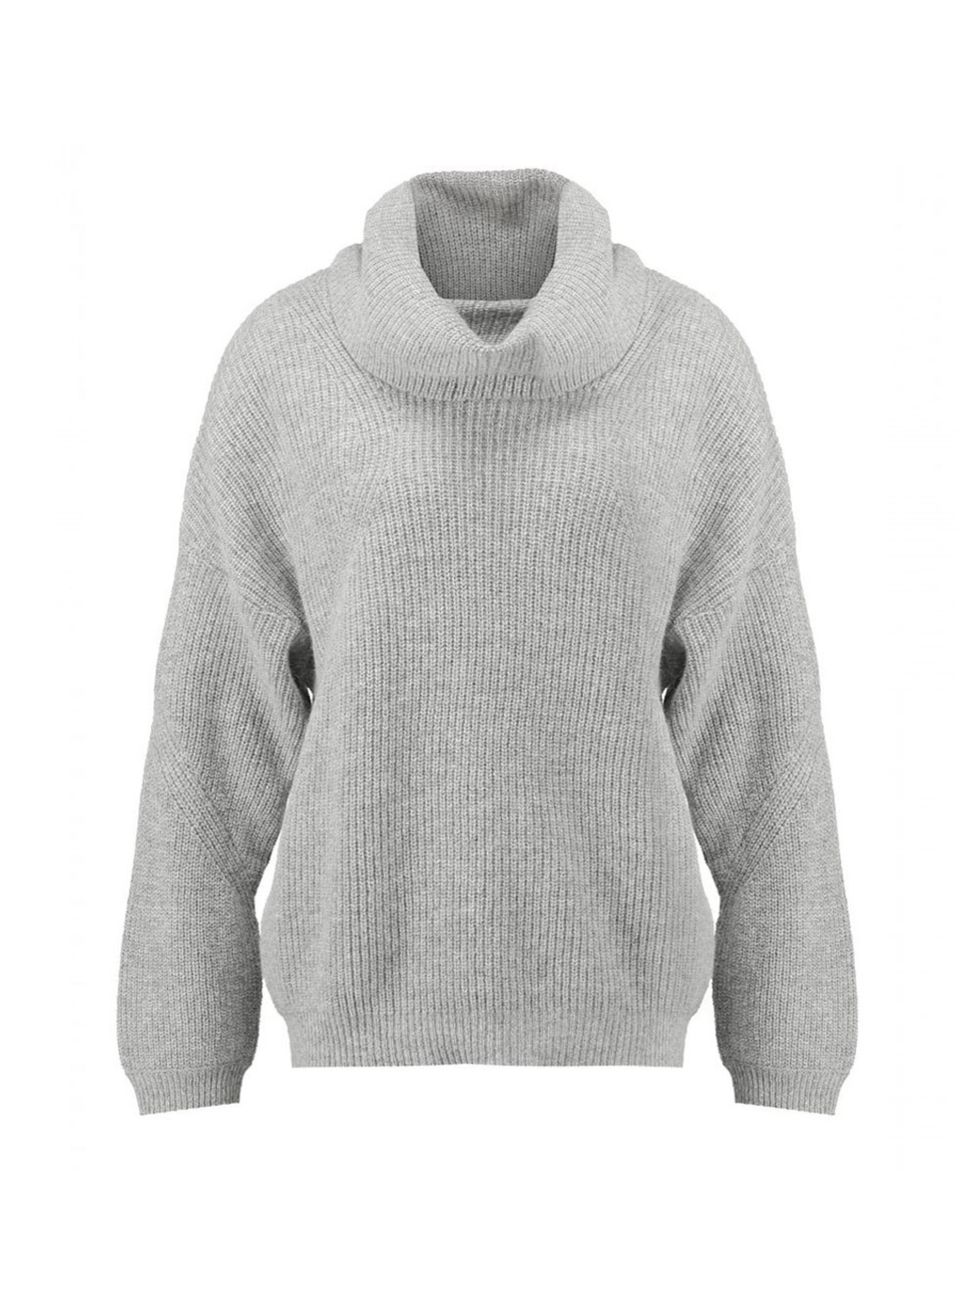 Clothing, Product, Sleeve, Sweater, Textile, Collar, Outerwear, White, Wool, Style, 